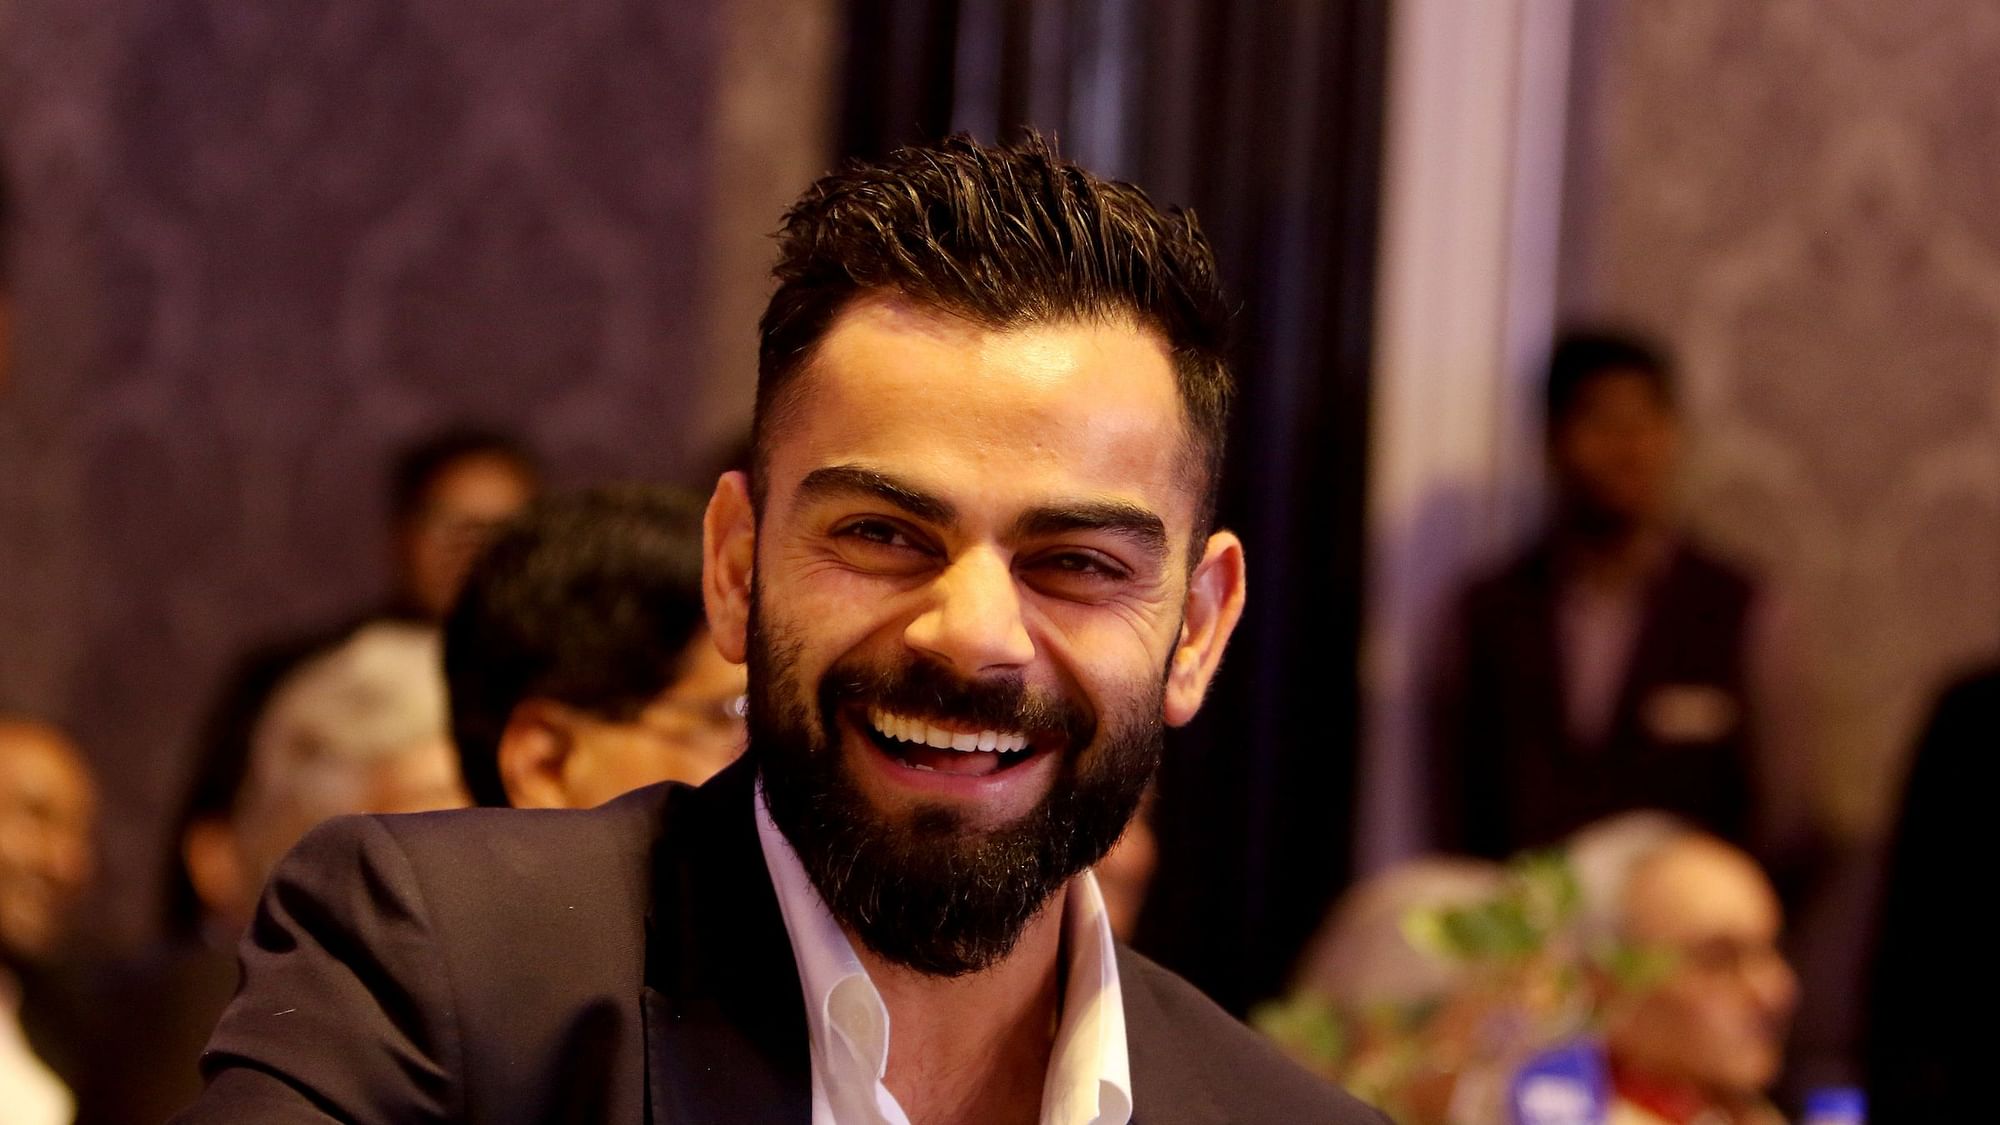 Virat Kohli won the ‘Spirit of Cricket’ award for his gesture of trying to stop the fans from booing Steve Smith during India’s match against Australia during the 2019 World Cup.